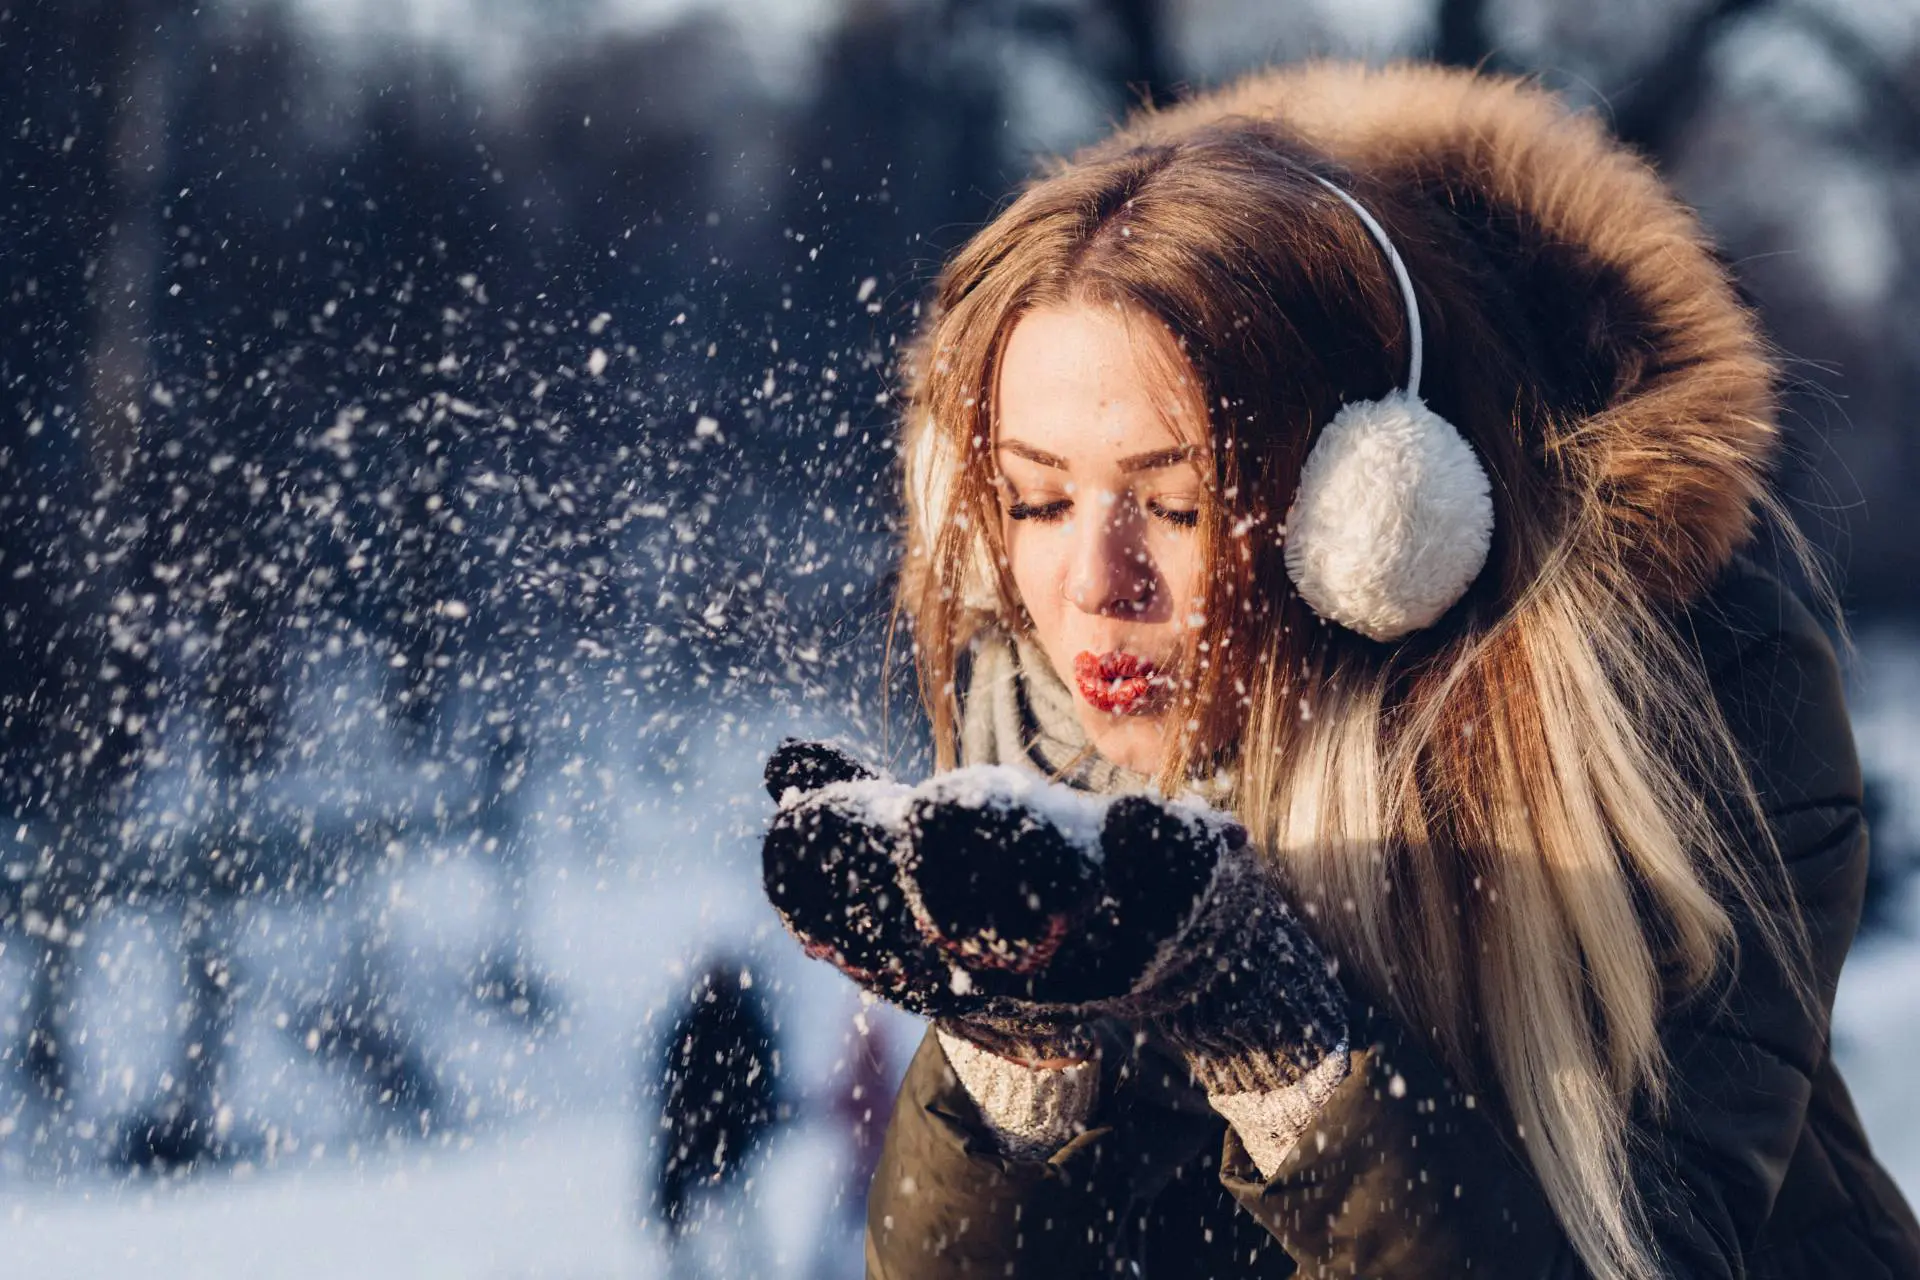 35 Best Winter Quotes - Cute Sayings About Snow & The Winter Season